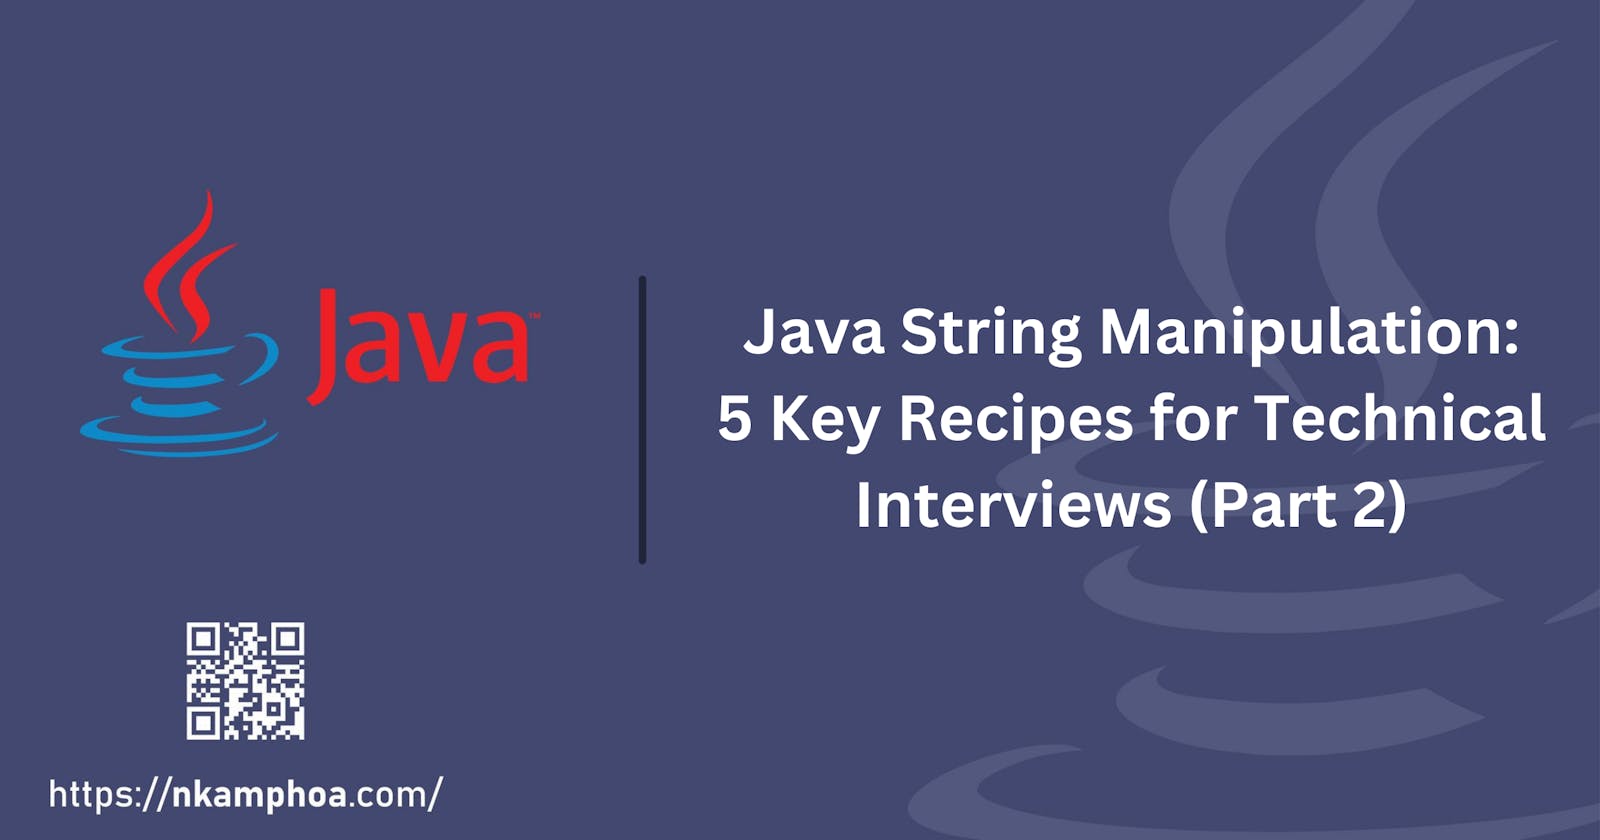 Java String Manipulation: 5 Key Recipes for Technical Interviews (Part 2)